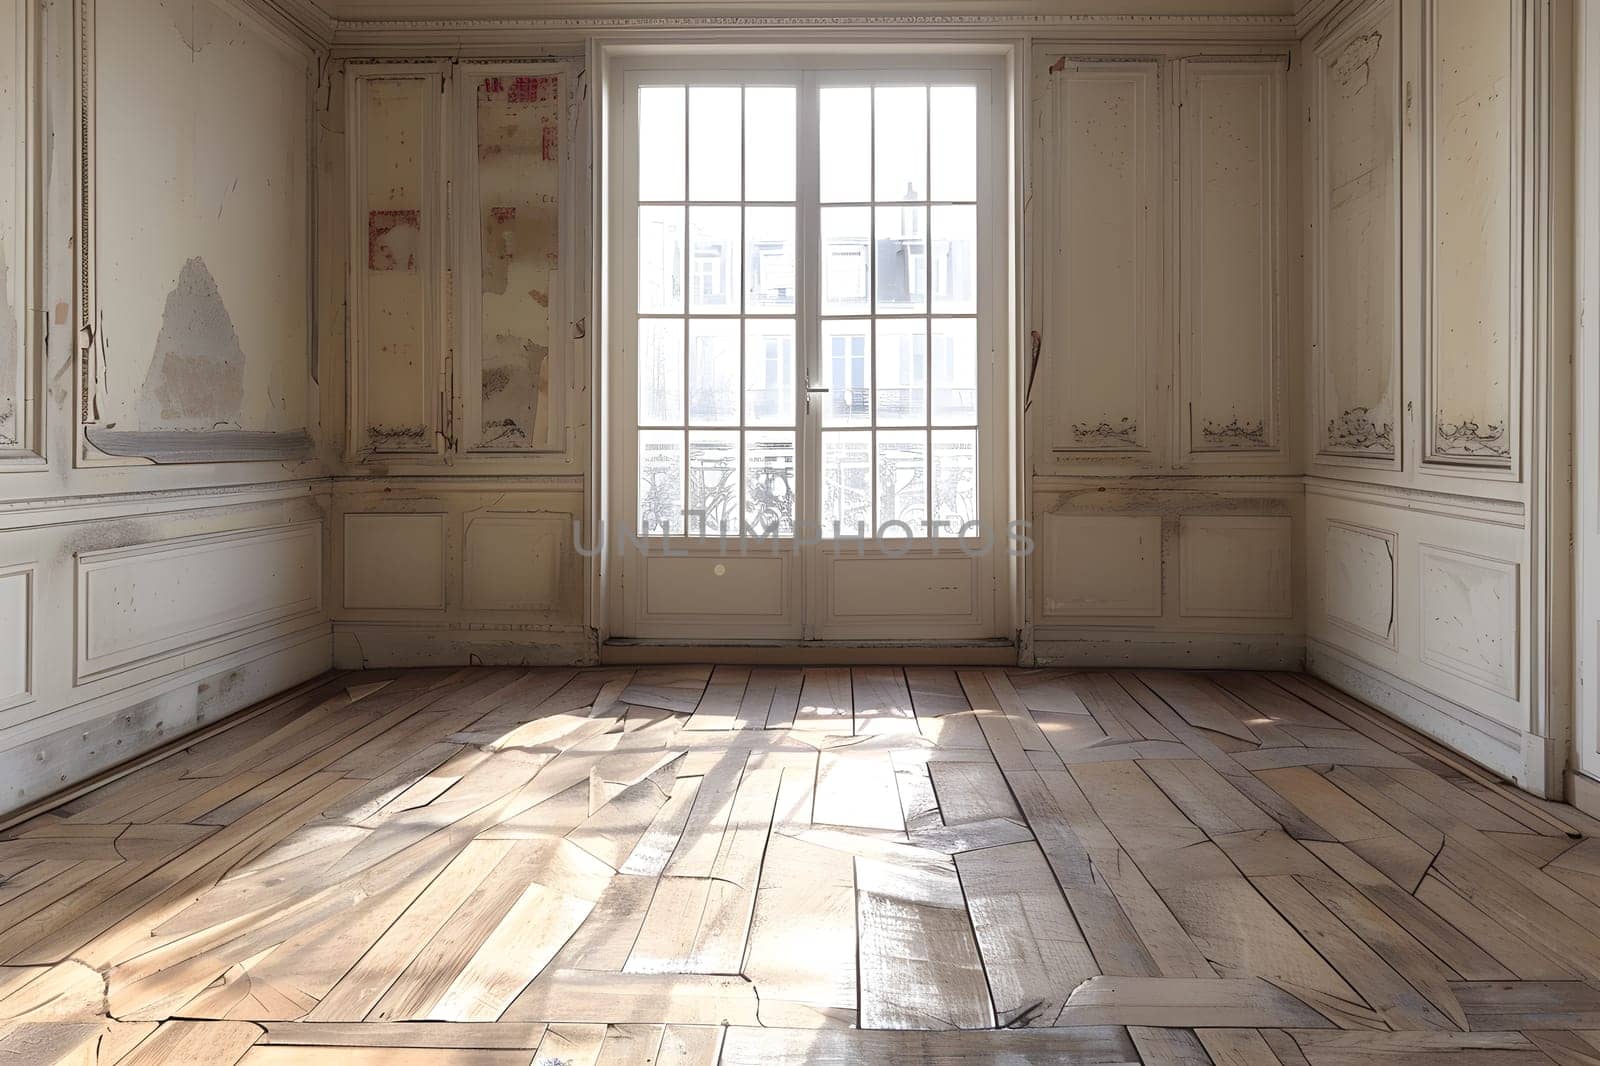 An empty room with hardwood flooring, a large window, and wooden fixtures by Nadtochiy